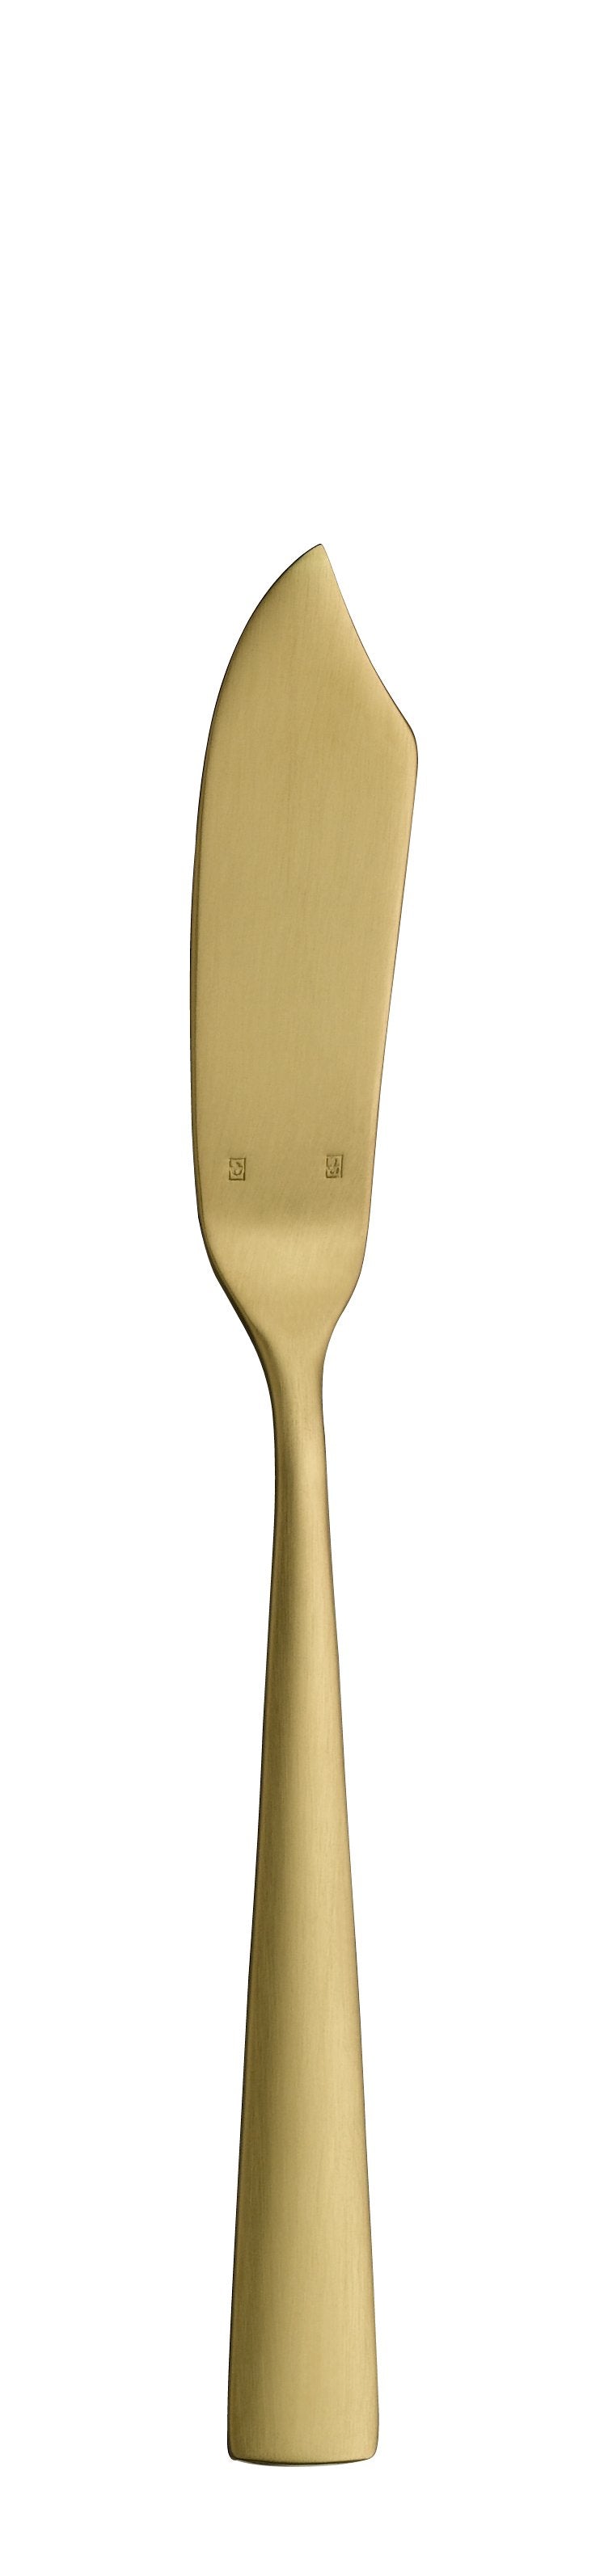 Fish knife ACCENT PVD gold brushed 204mm